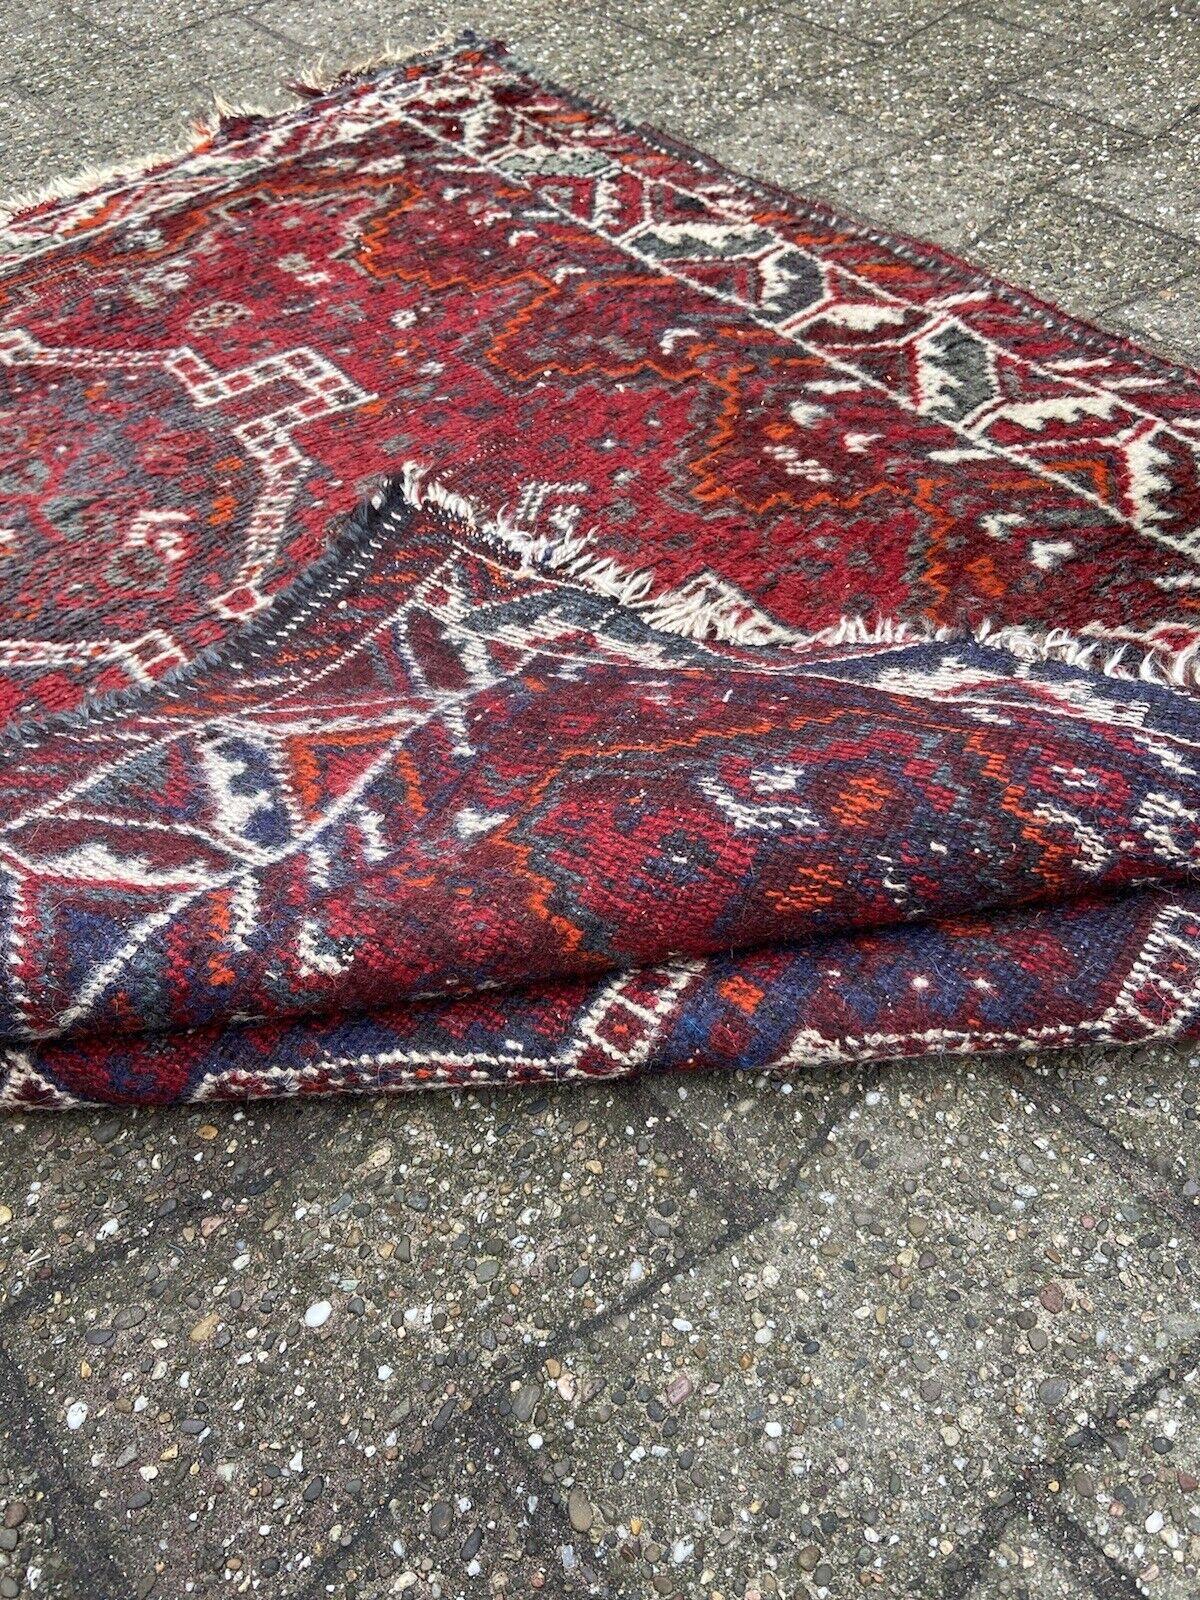 Introducing our Handmade Vintage Persian Style Shiraz Rug, a piece of history from the 1940s. Measuring 3.9 feet by 5 feet, this rug carries with it the marks of time, with some ends missing and signs of age wear. Crafted from wool, it exudes the